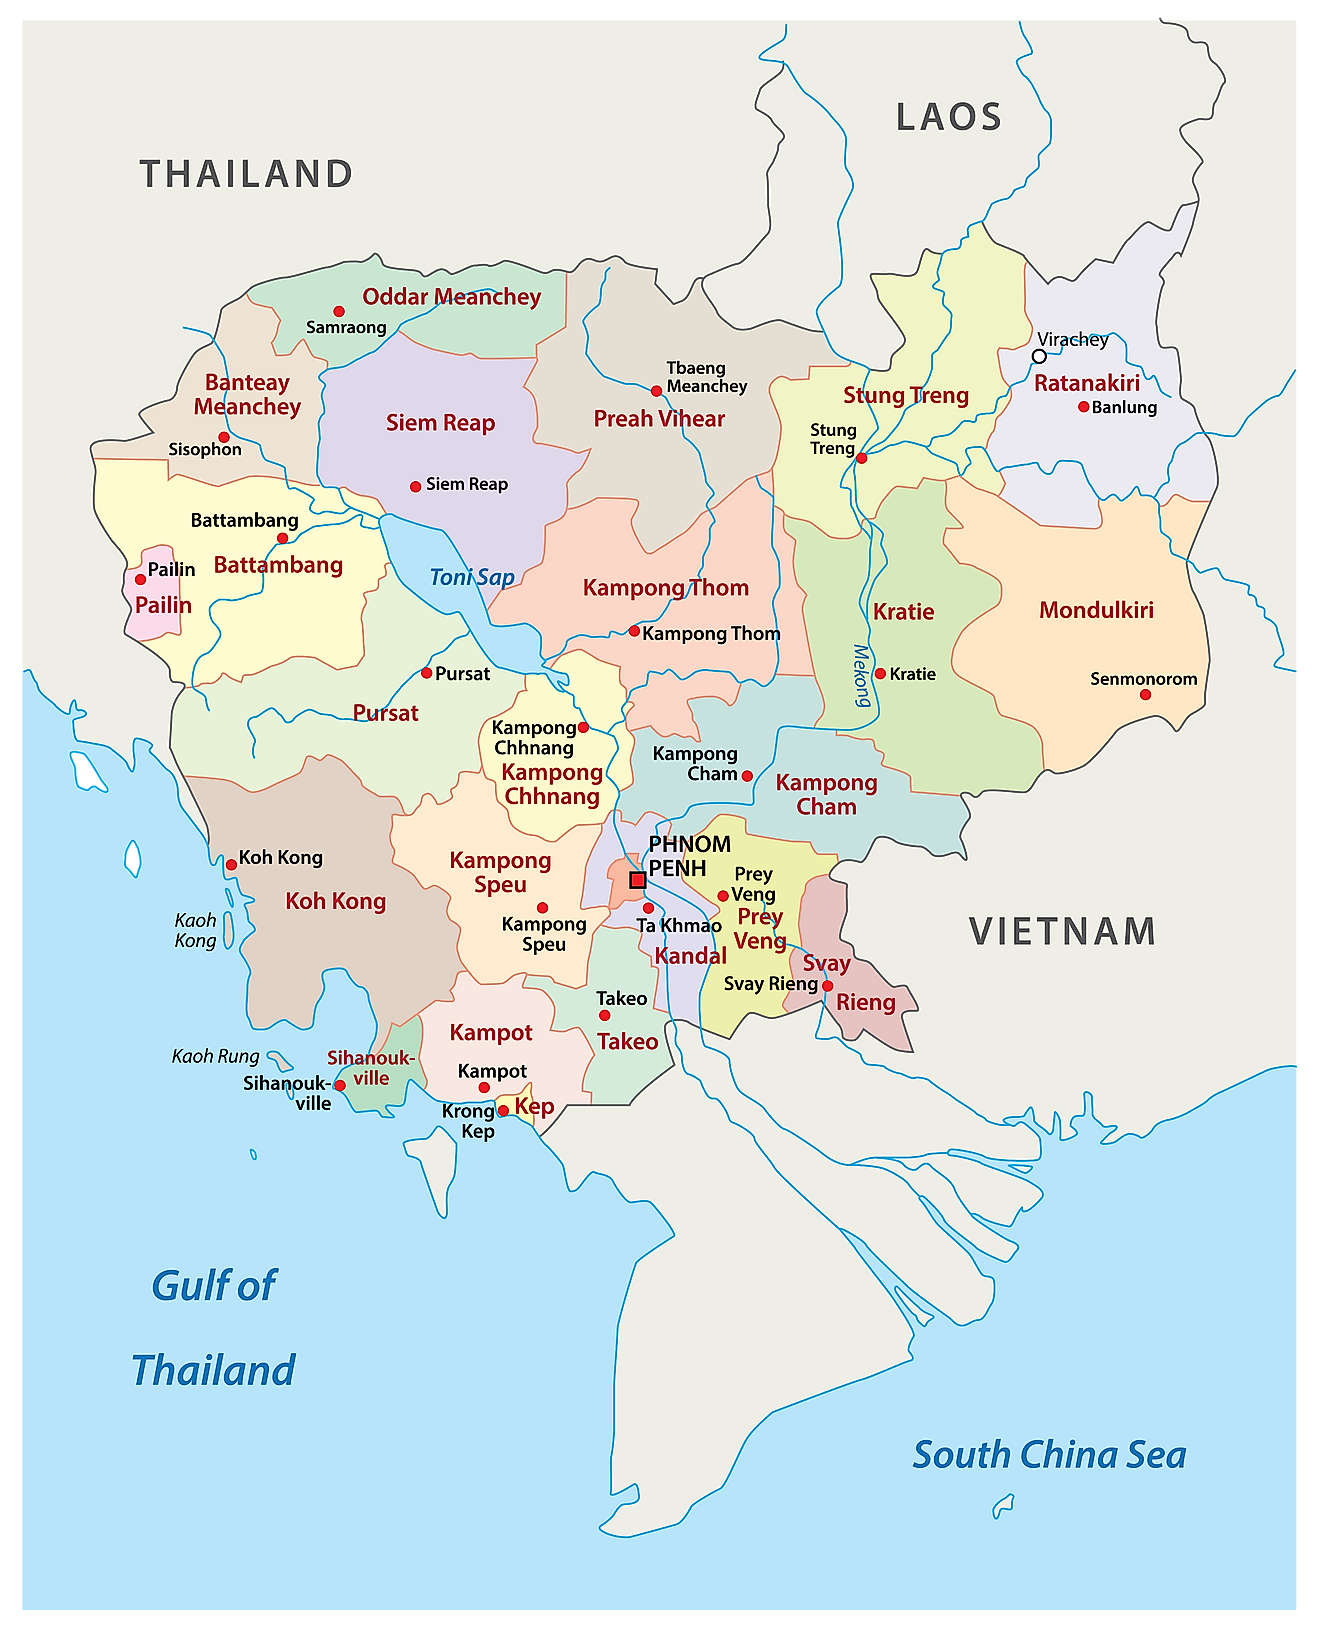 Political Map of Cambodia showing 21 provinces, their capitals, and the national capital of Phnom Penh.